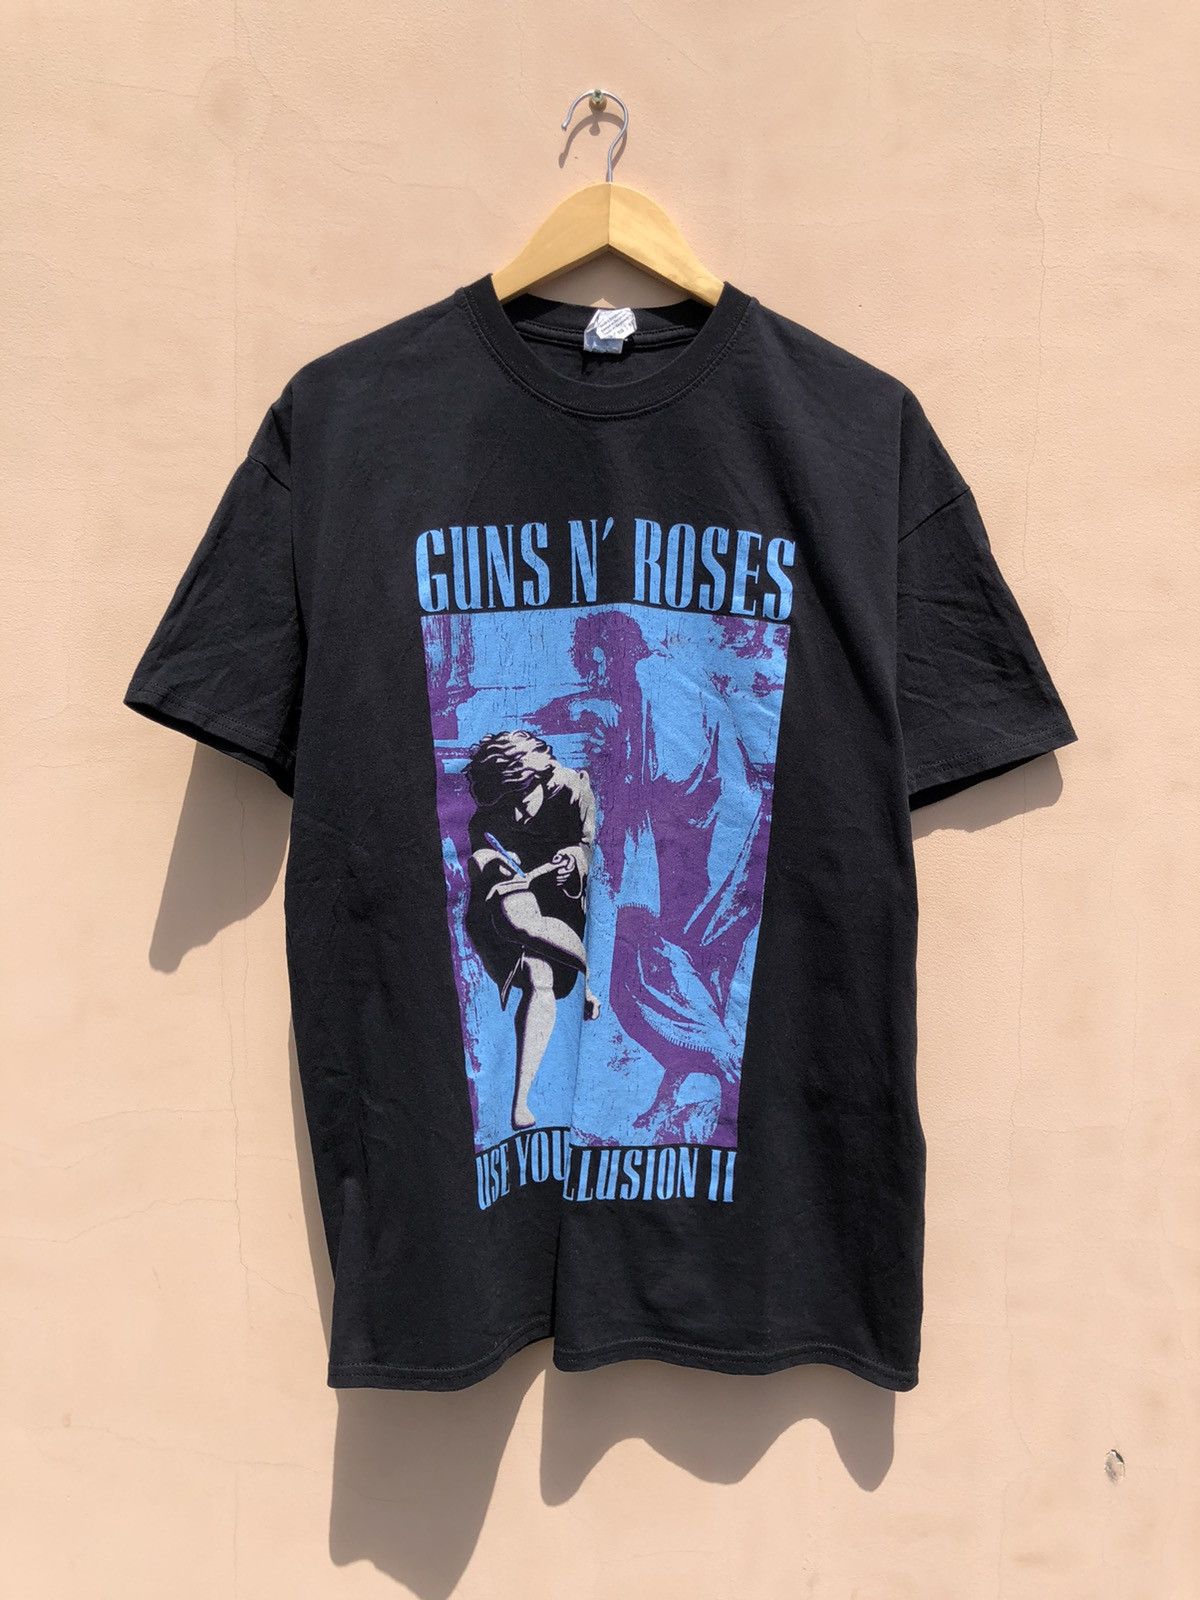 Pre-owned Band Tees X Rock T Shirt Vintage 2016 Guns N Roses Use Your Illusion Black Tee